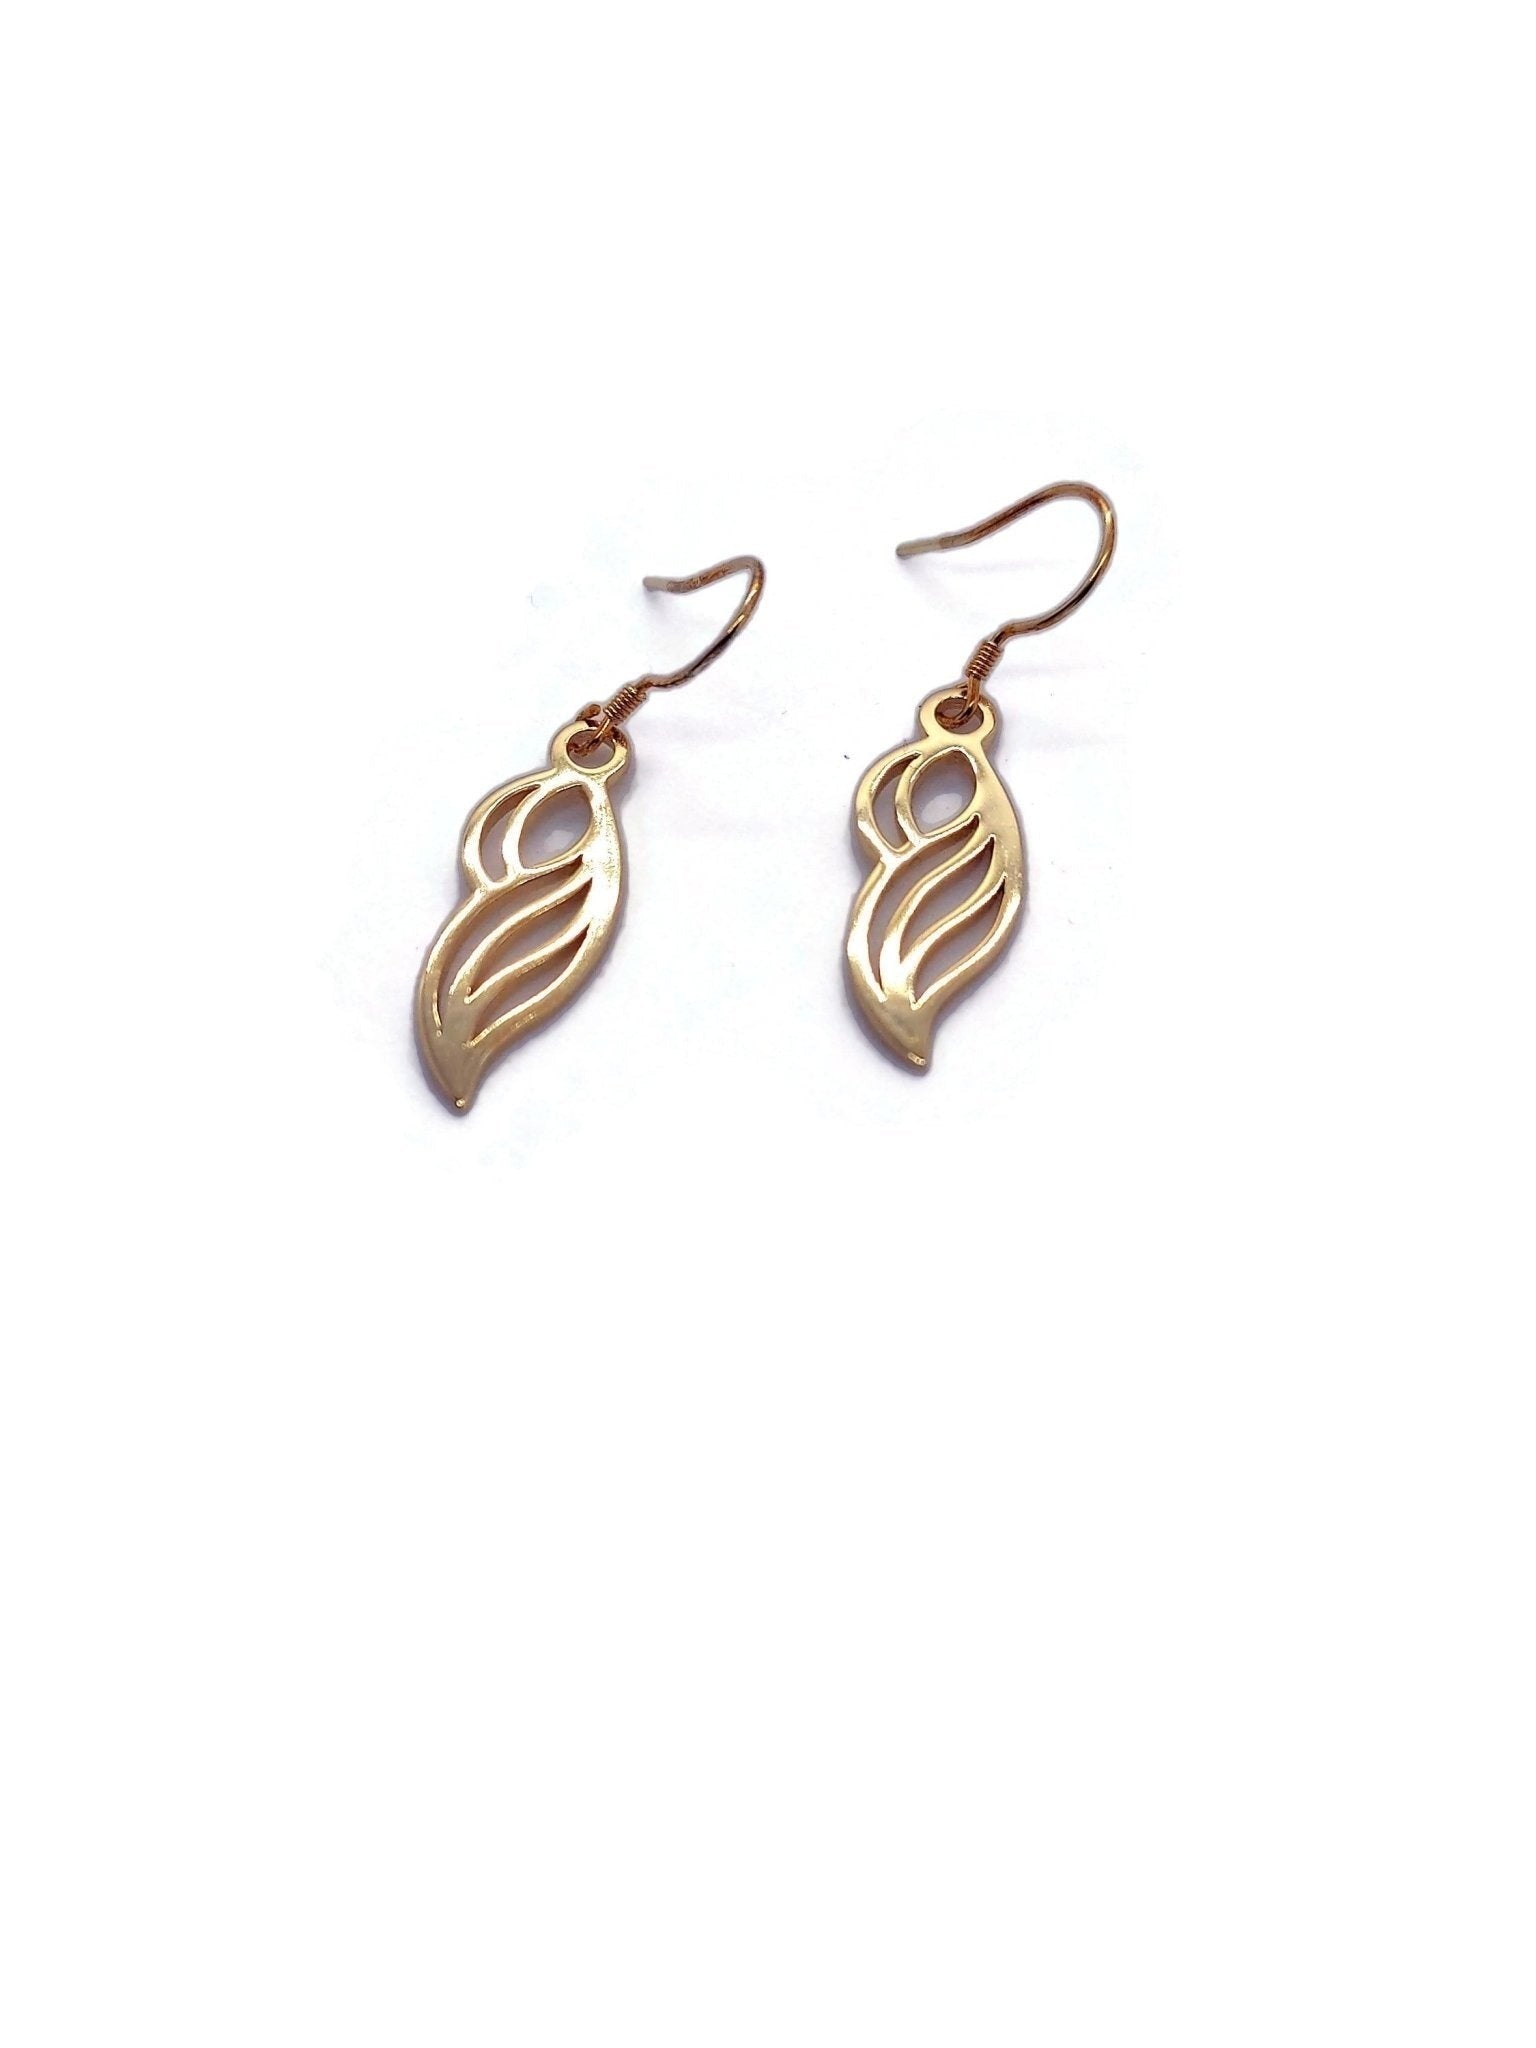 18k plated rose gold earrings inspired by fluidity, waves, air and a woman's form.